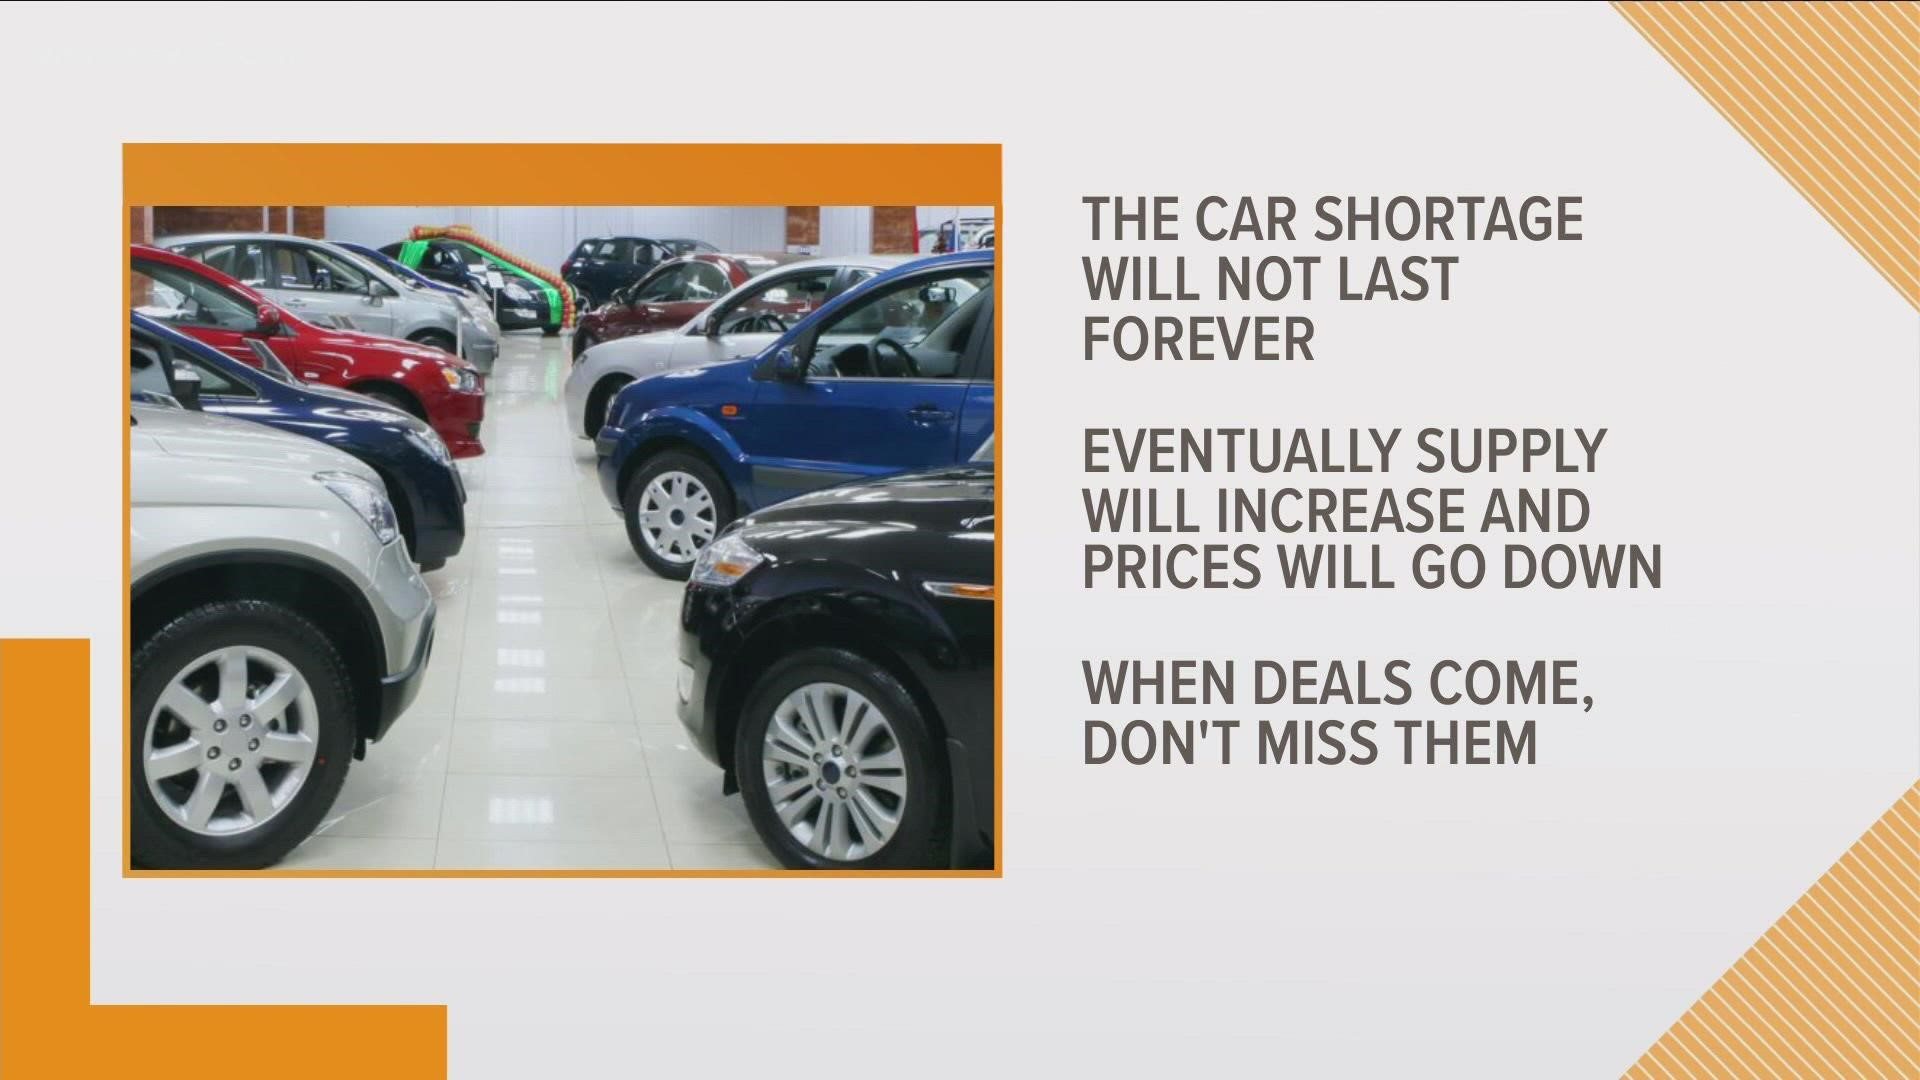 Parts shortages and shipping delays could further slow car inventory well through next year.